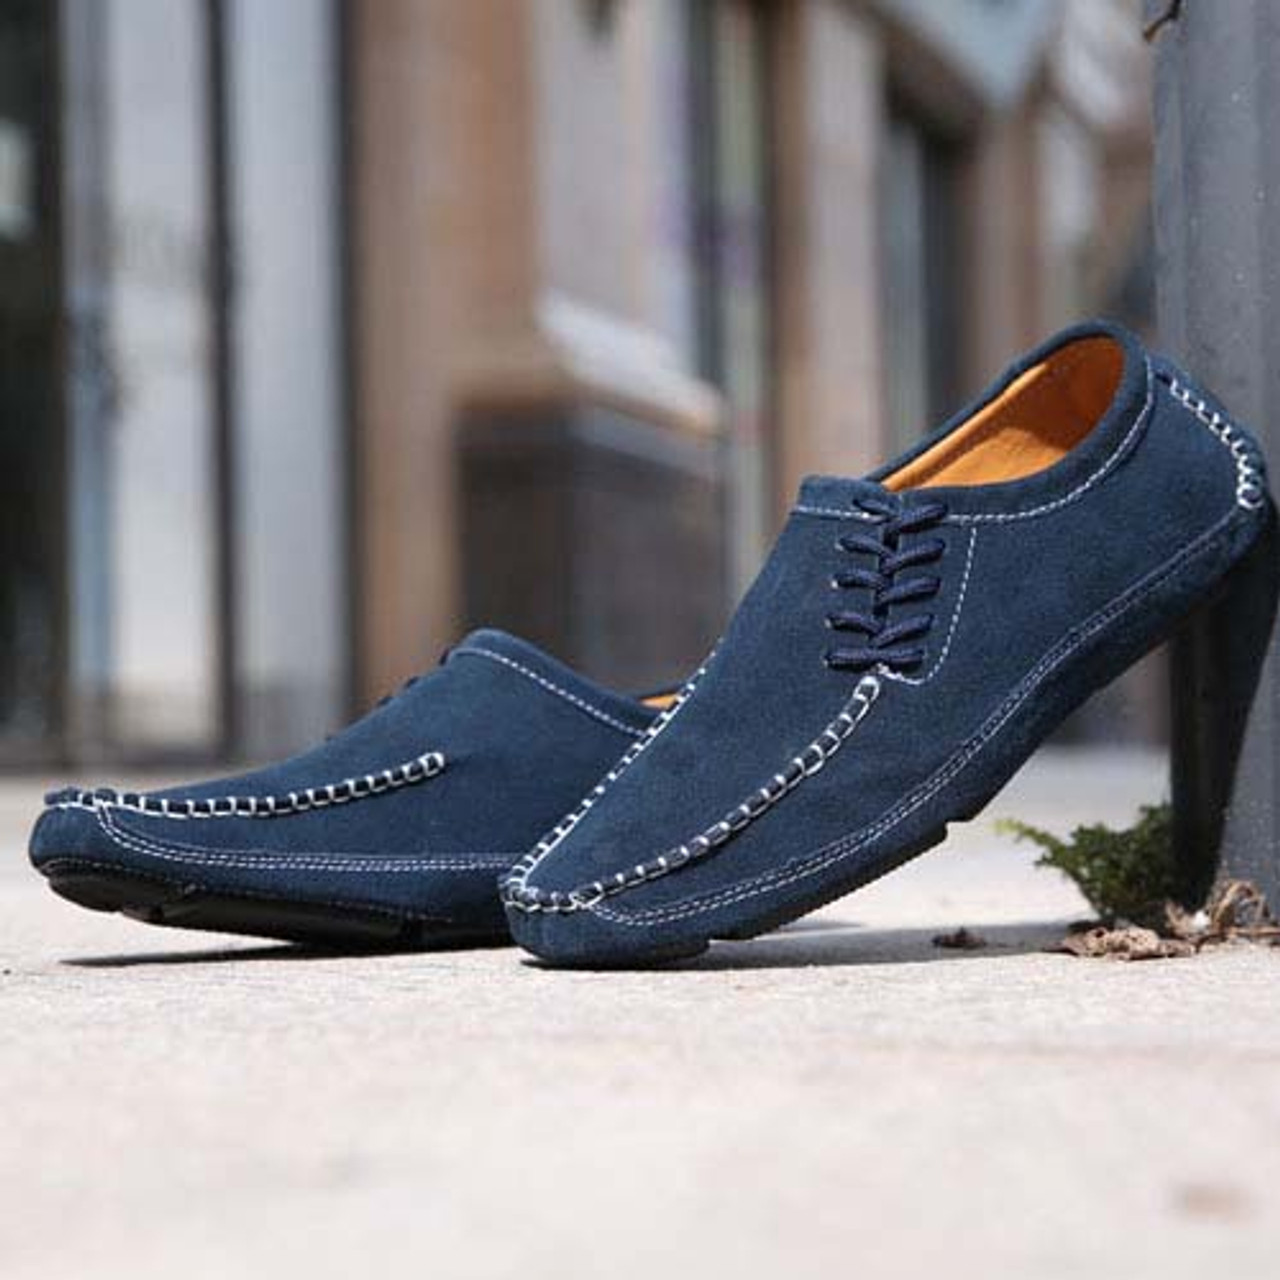 Blue urban casual suede leather slip on shoe loafer | Mens shoes online ...